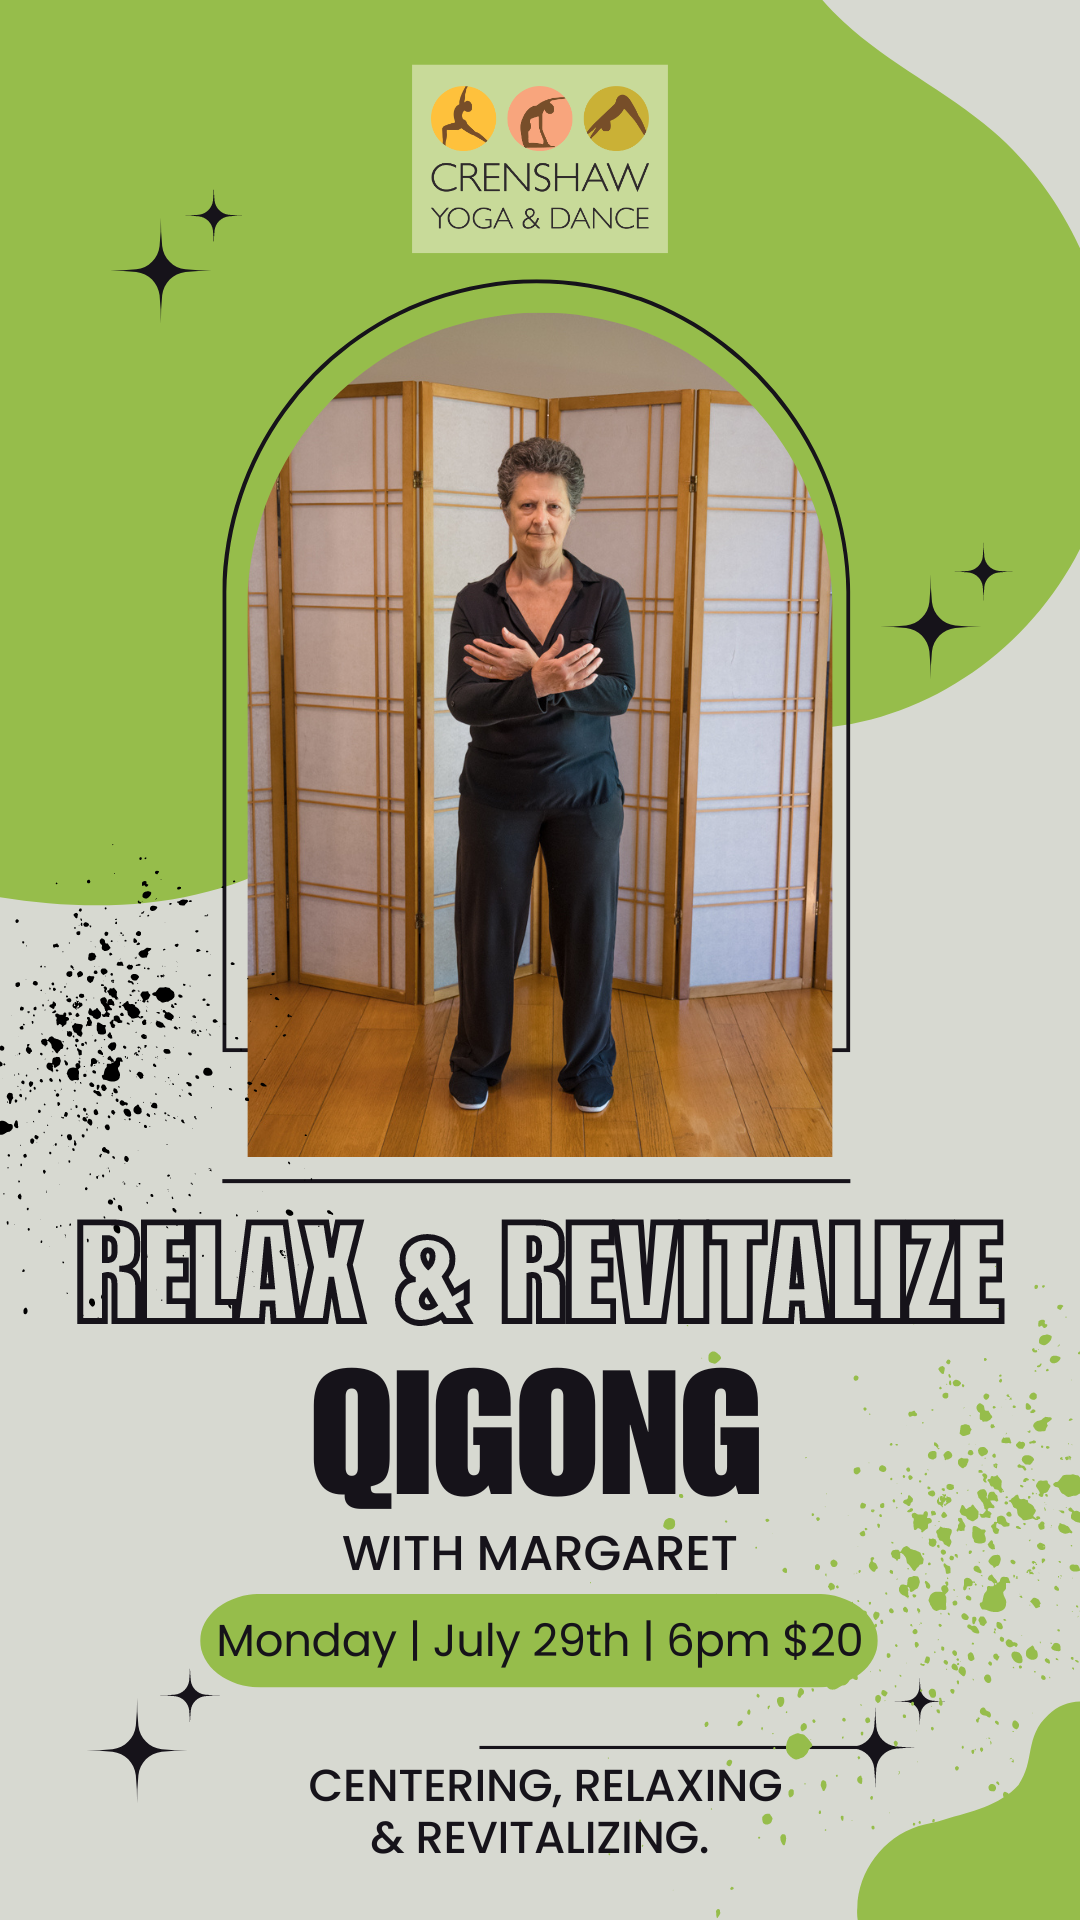 Relax & Revitalize with Qigong (lead by Margaret) July 29th 6pm $20